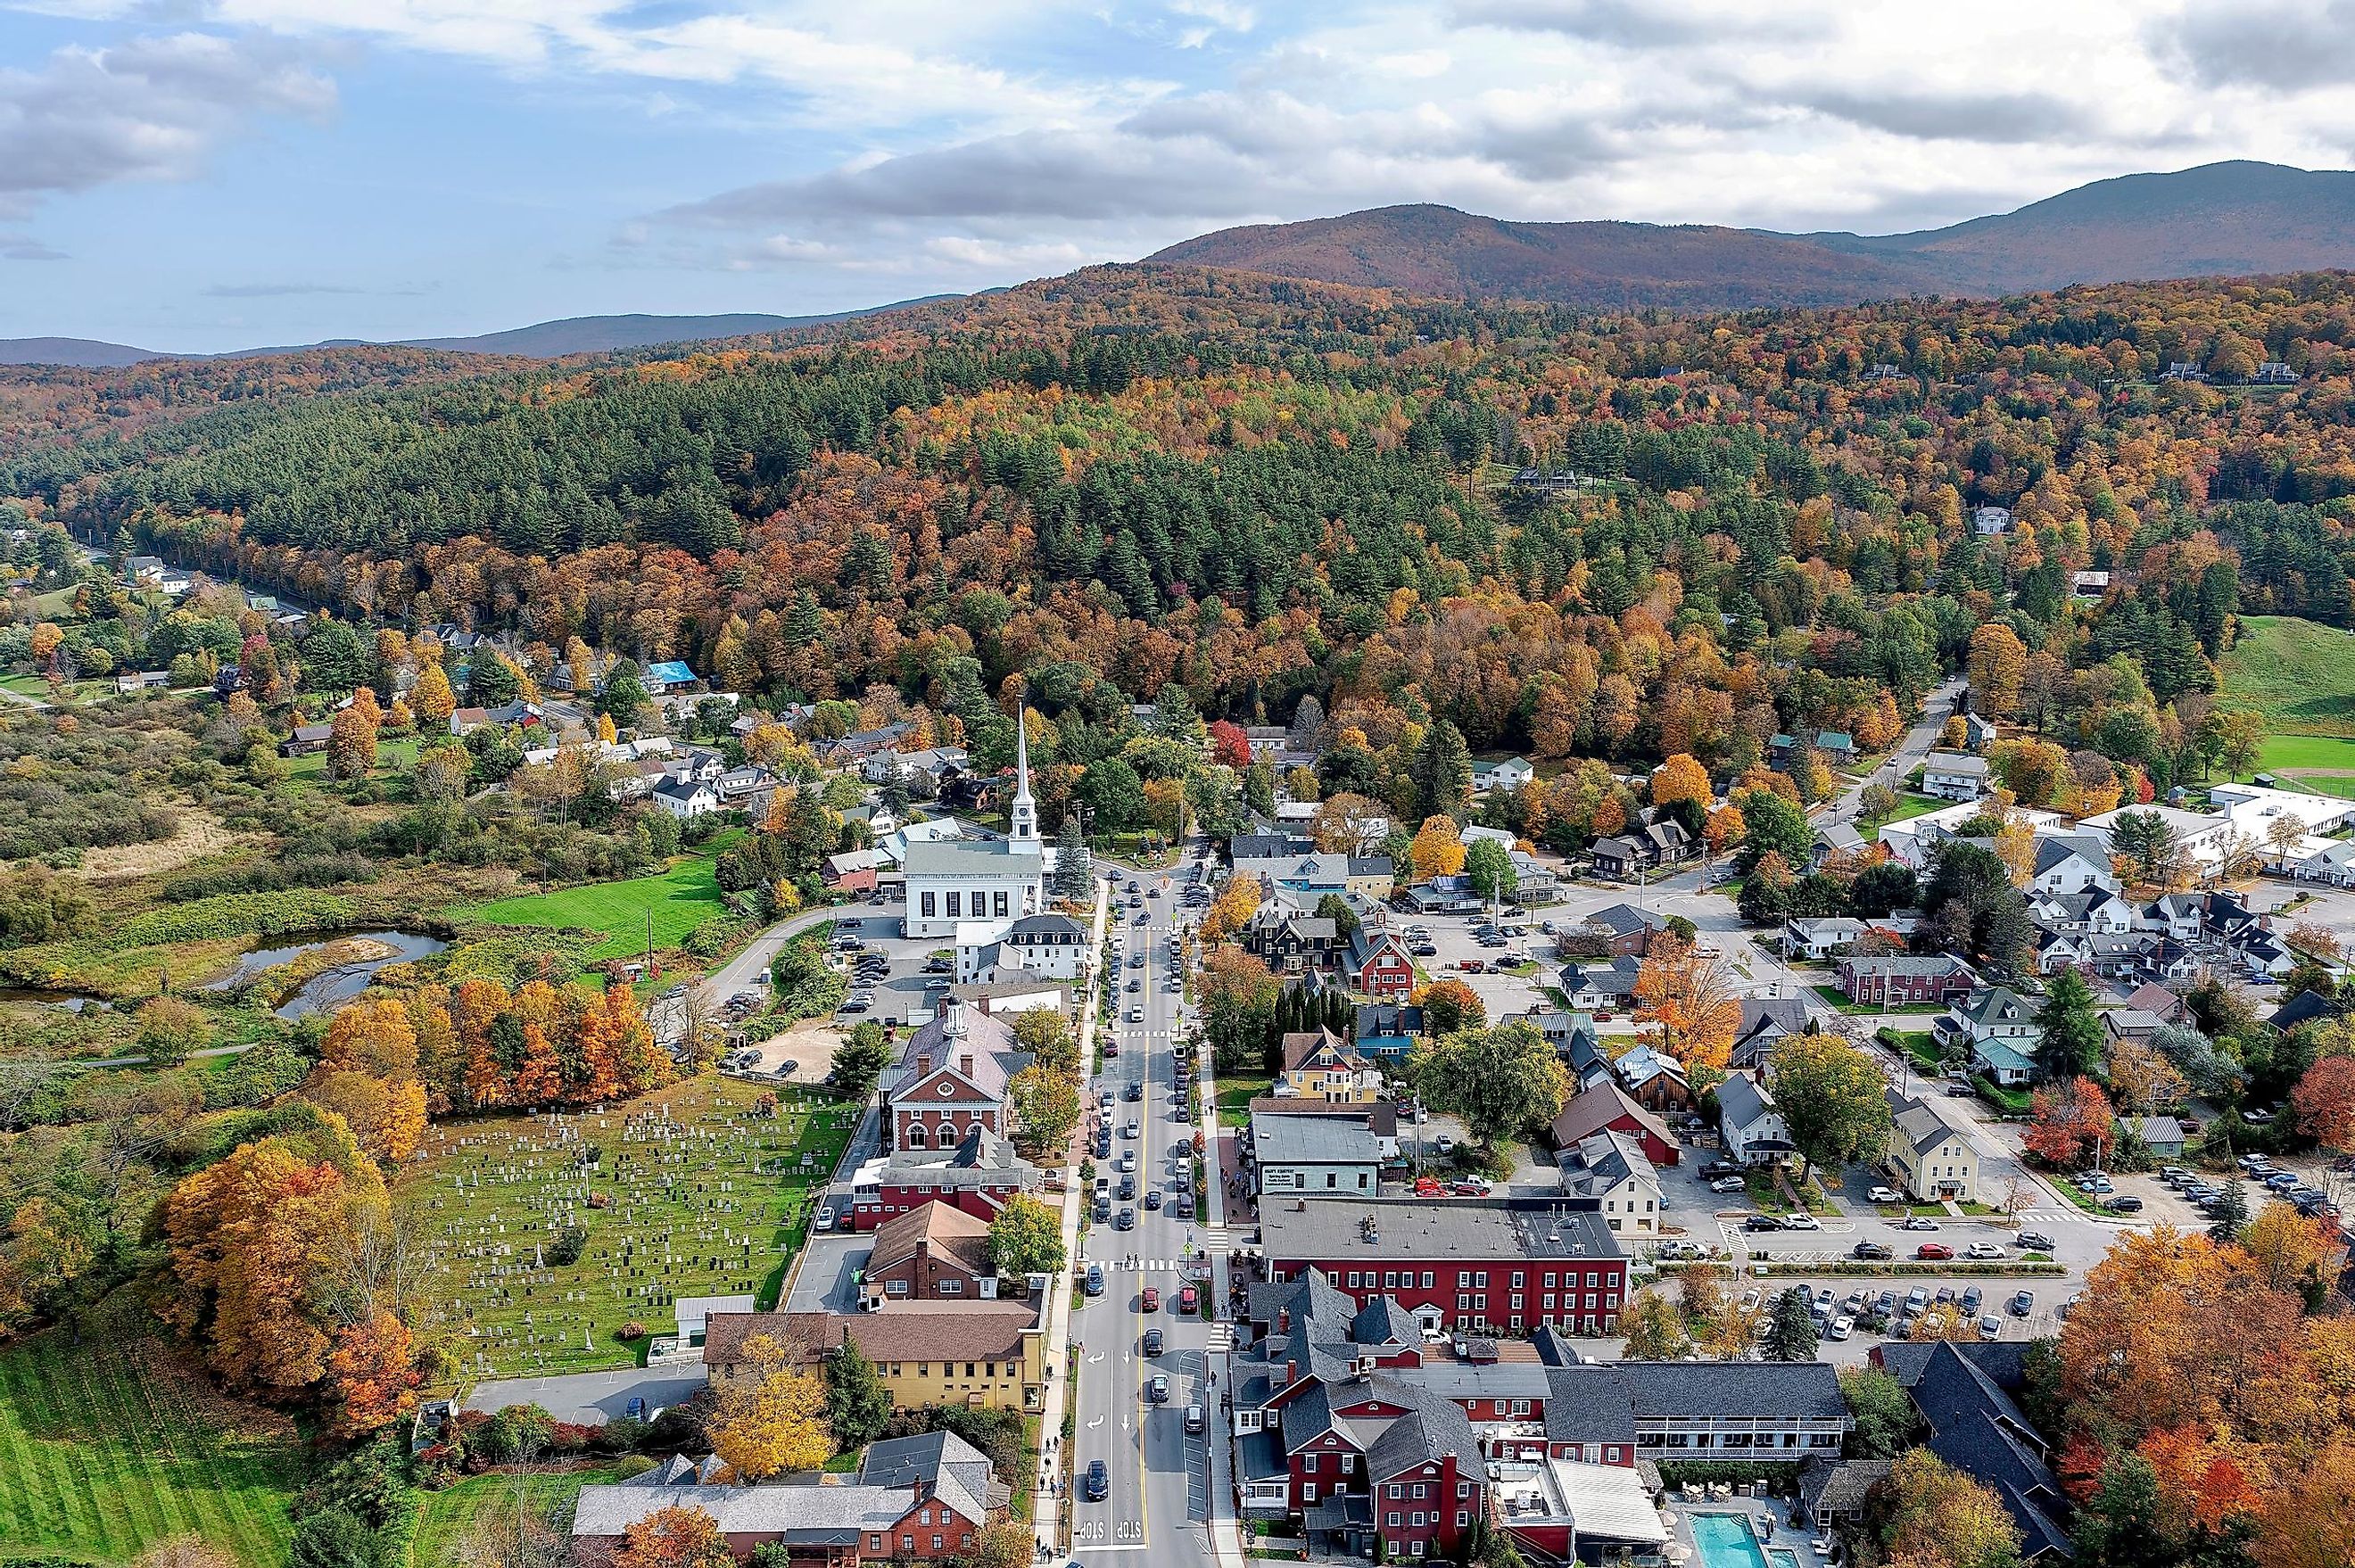 Aerial view of Stowe Vermont and the Green Mountains with autumn colors.